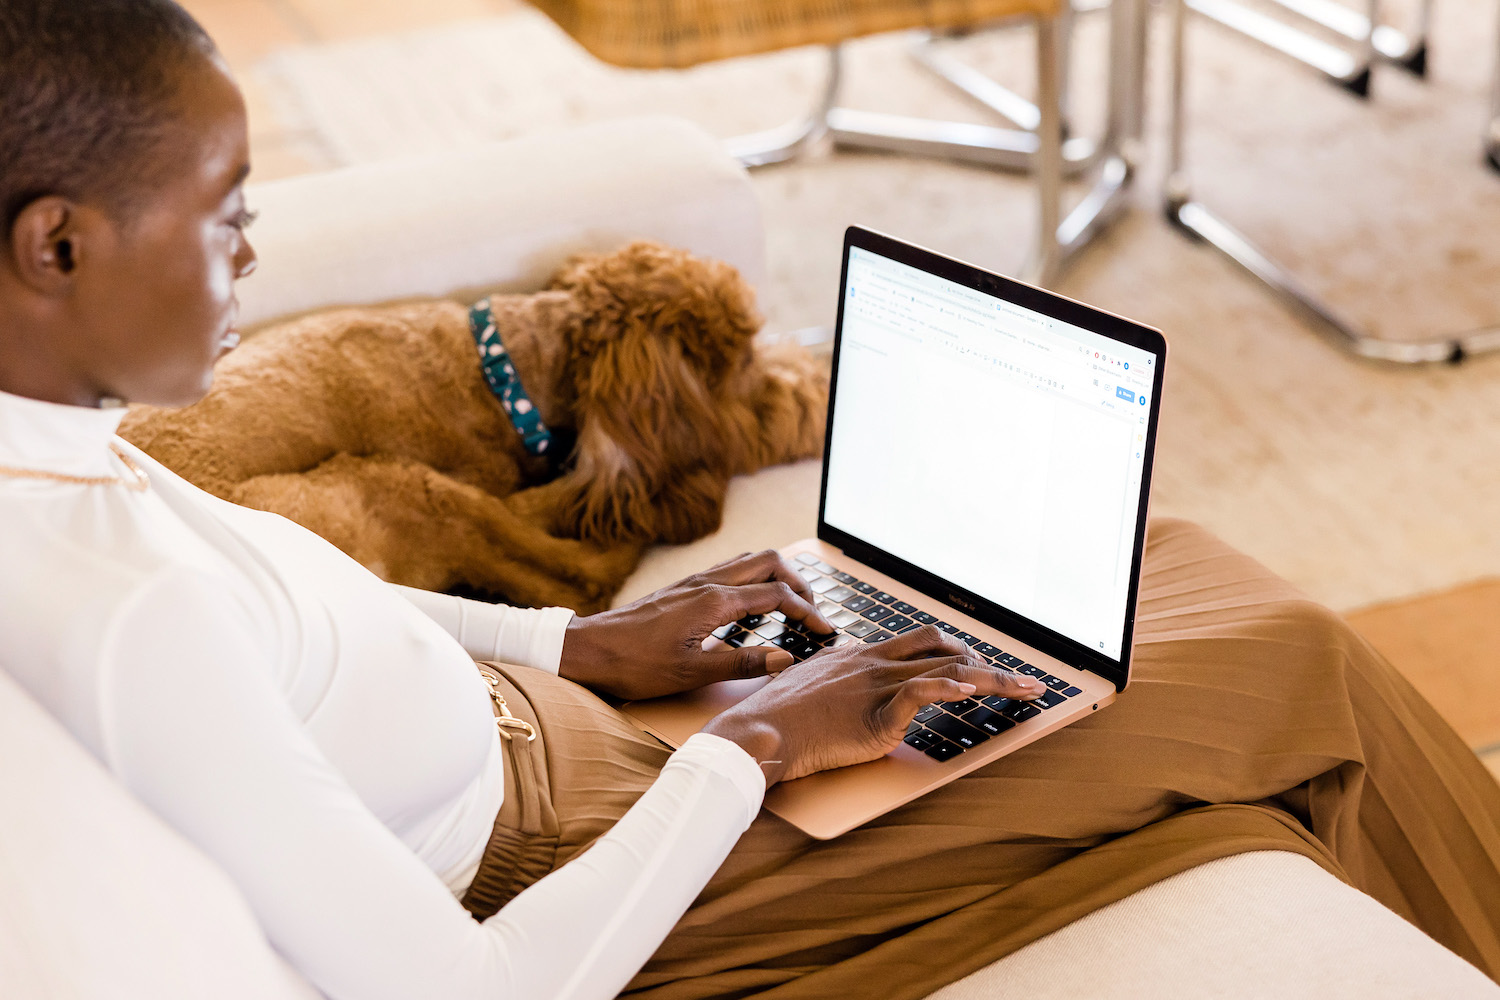 A Black feminine-presenting person sits on a couch with a rose gold Macbook on her lap. She's typing although we can't see what's on the screen. A golden poodle or doodle dog is next to her on the couch.